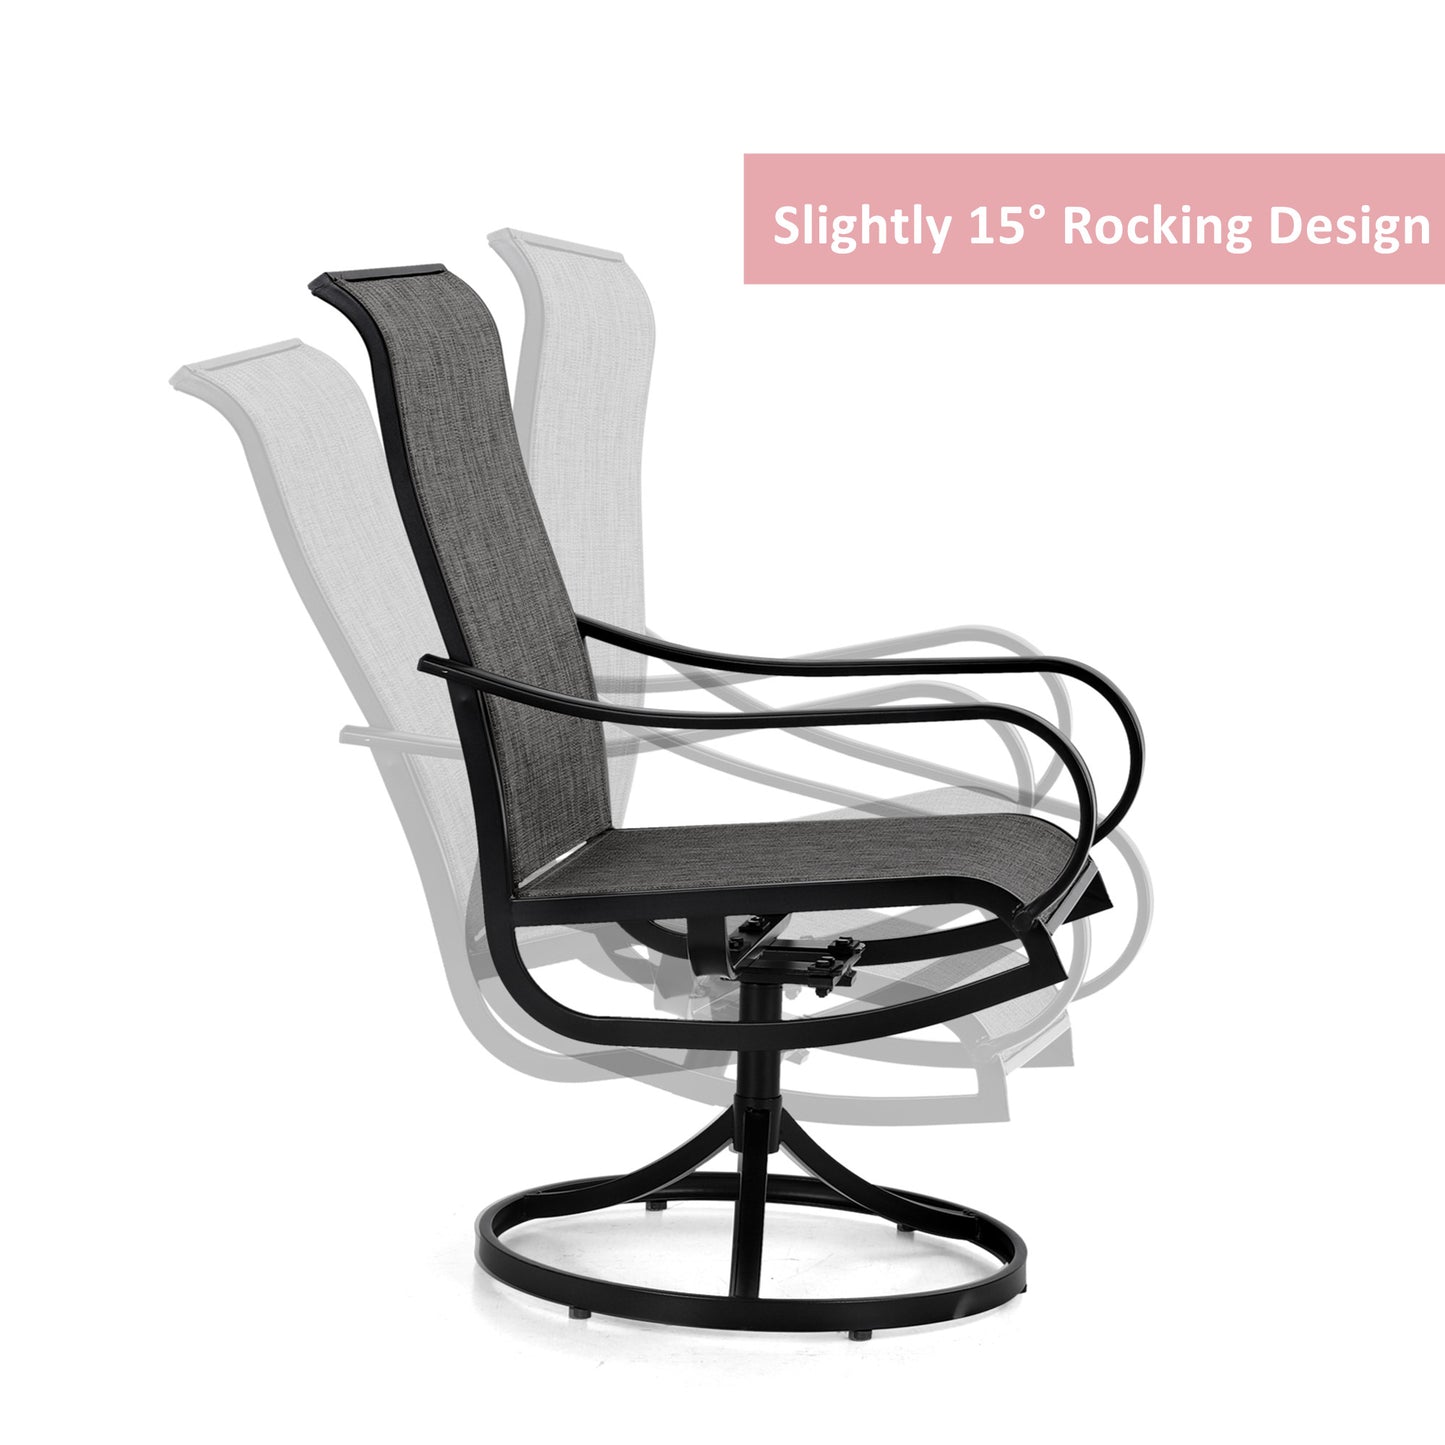 Sophia & William 4Pcs Patio Dining Swivel Chairs Set with Black Steel Frame